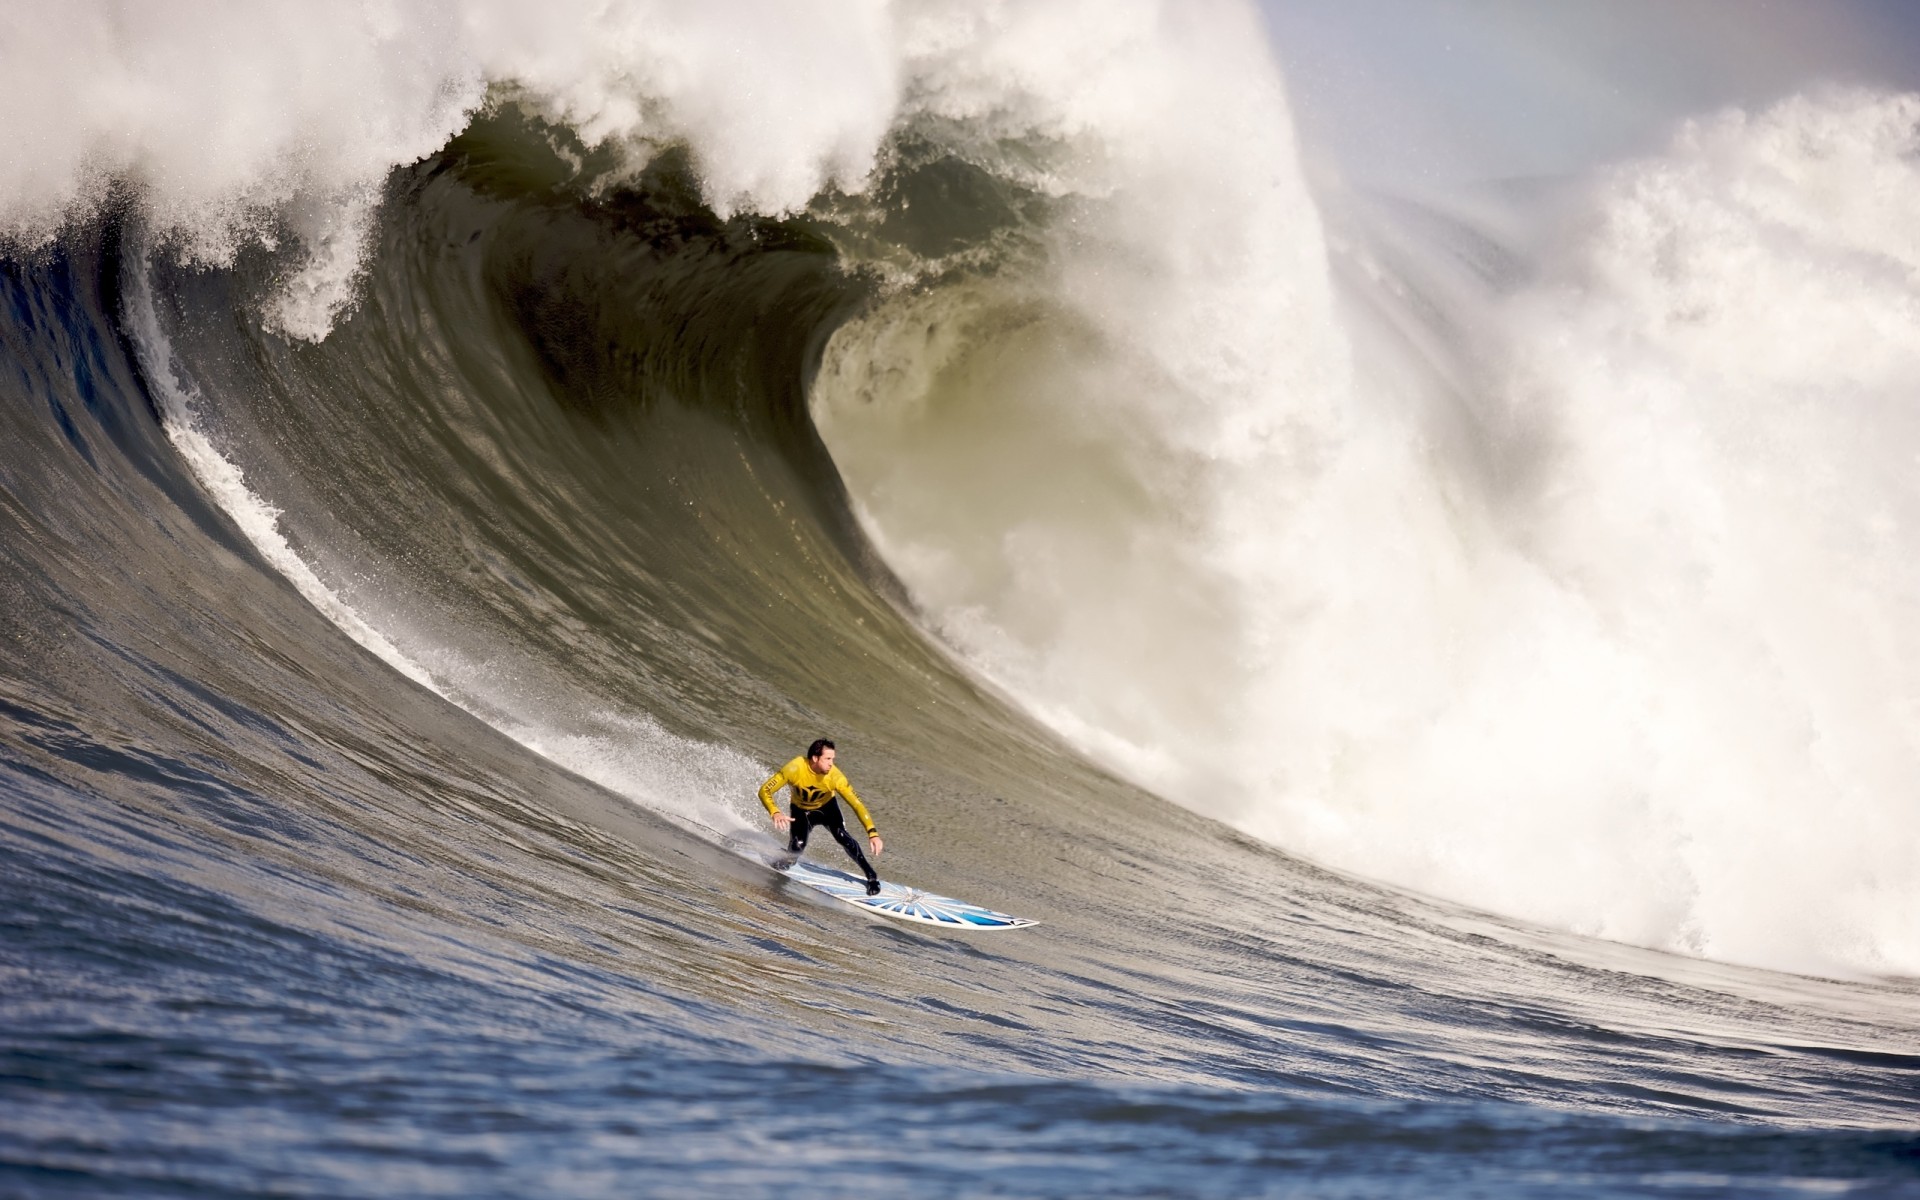 sports, Surfing, Surfboard, Waves, Ocean, Sea, Power, Drops, Spray, Explosion, Men, Males, Boy, Extreme, Awesome Wallpaper